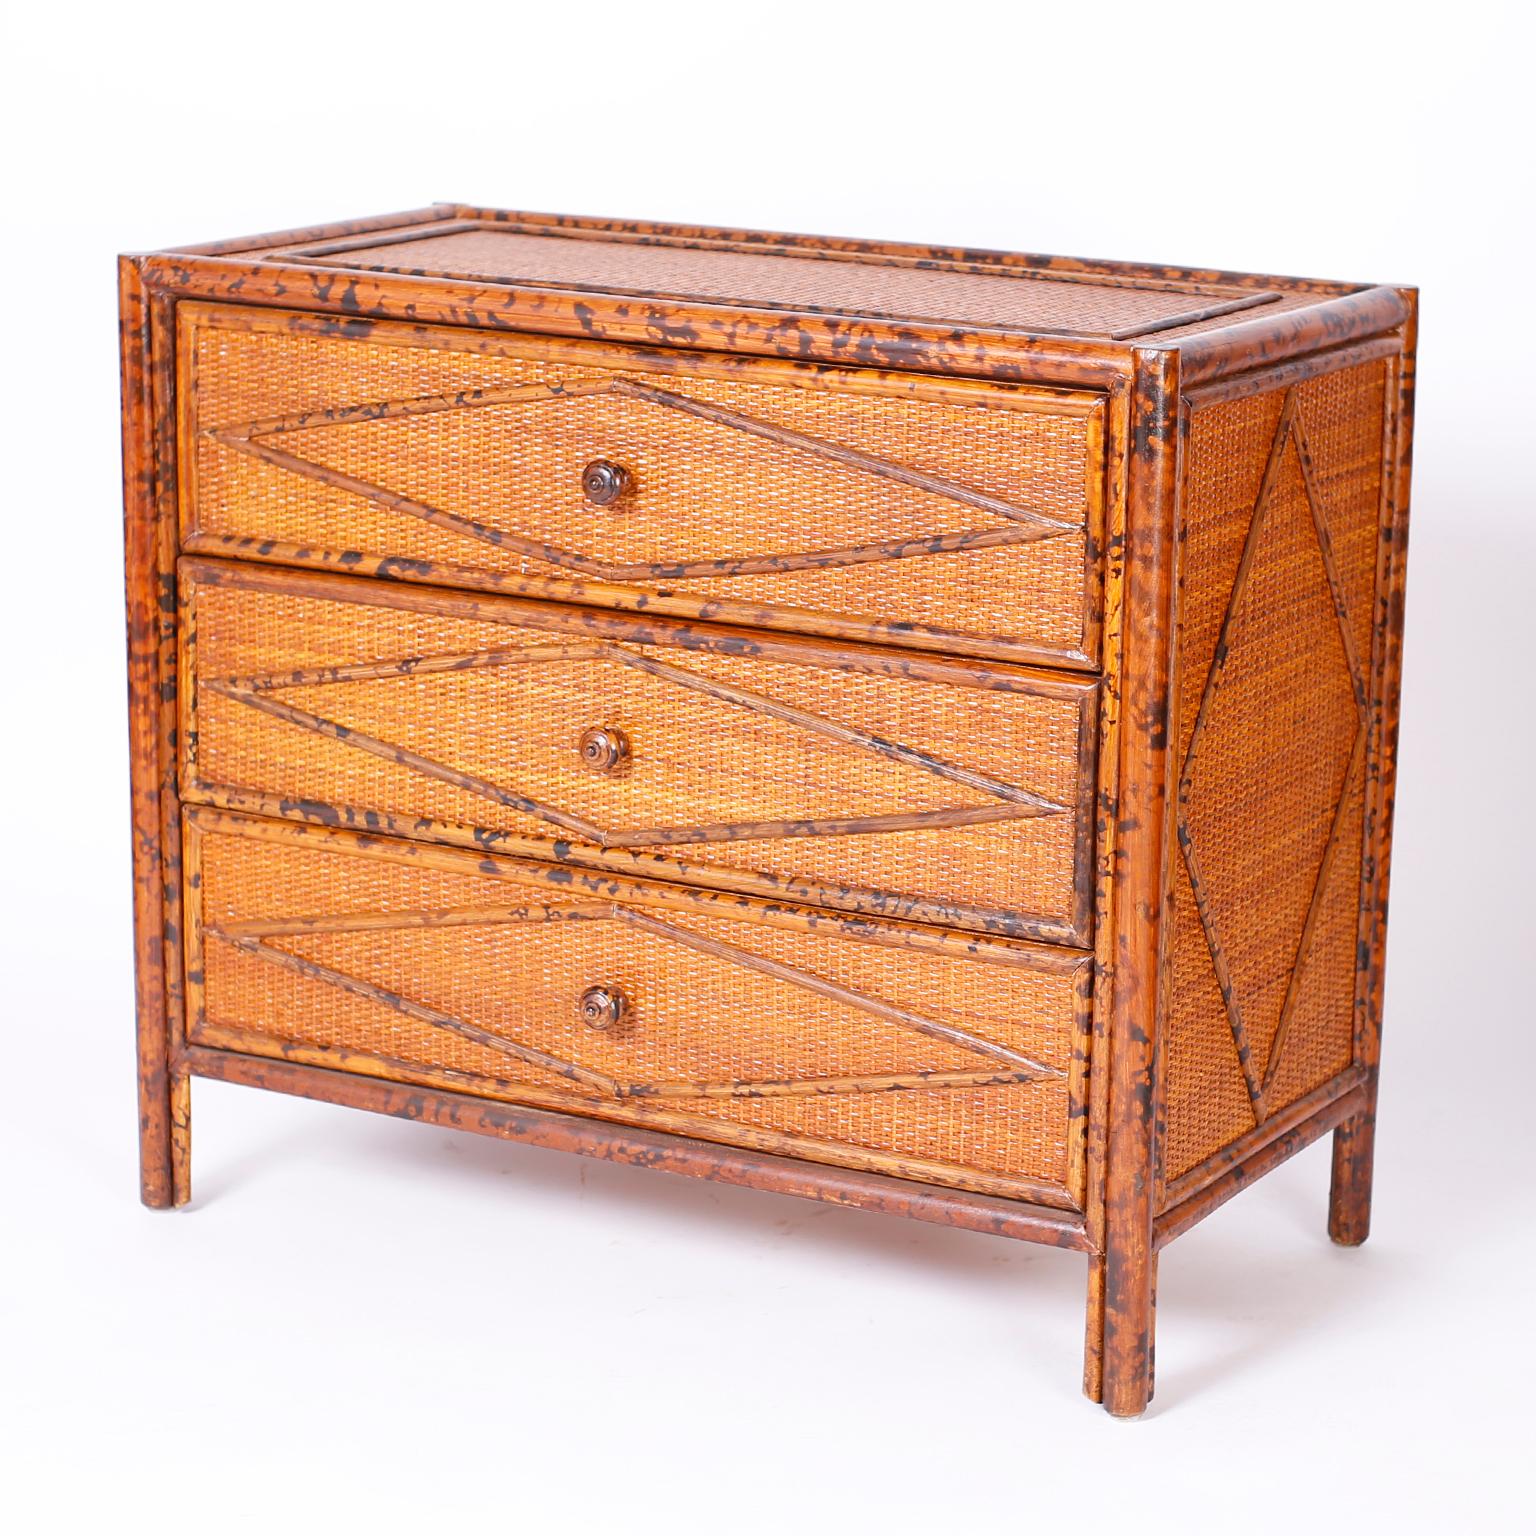 British Colonial Pair of Faux Burnt Bamboo and Grasscloth Chests or Nightstands